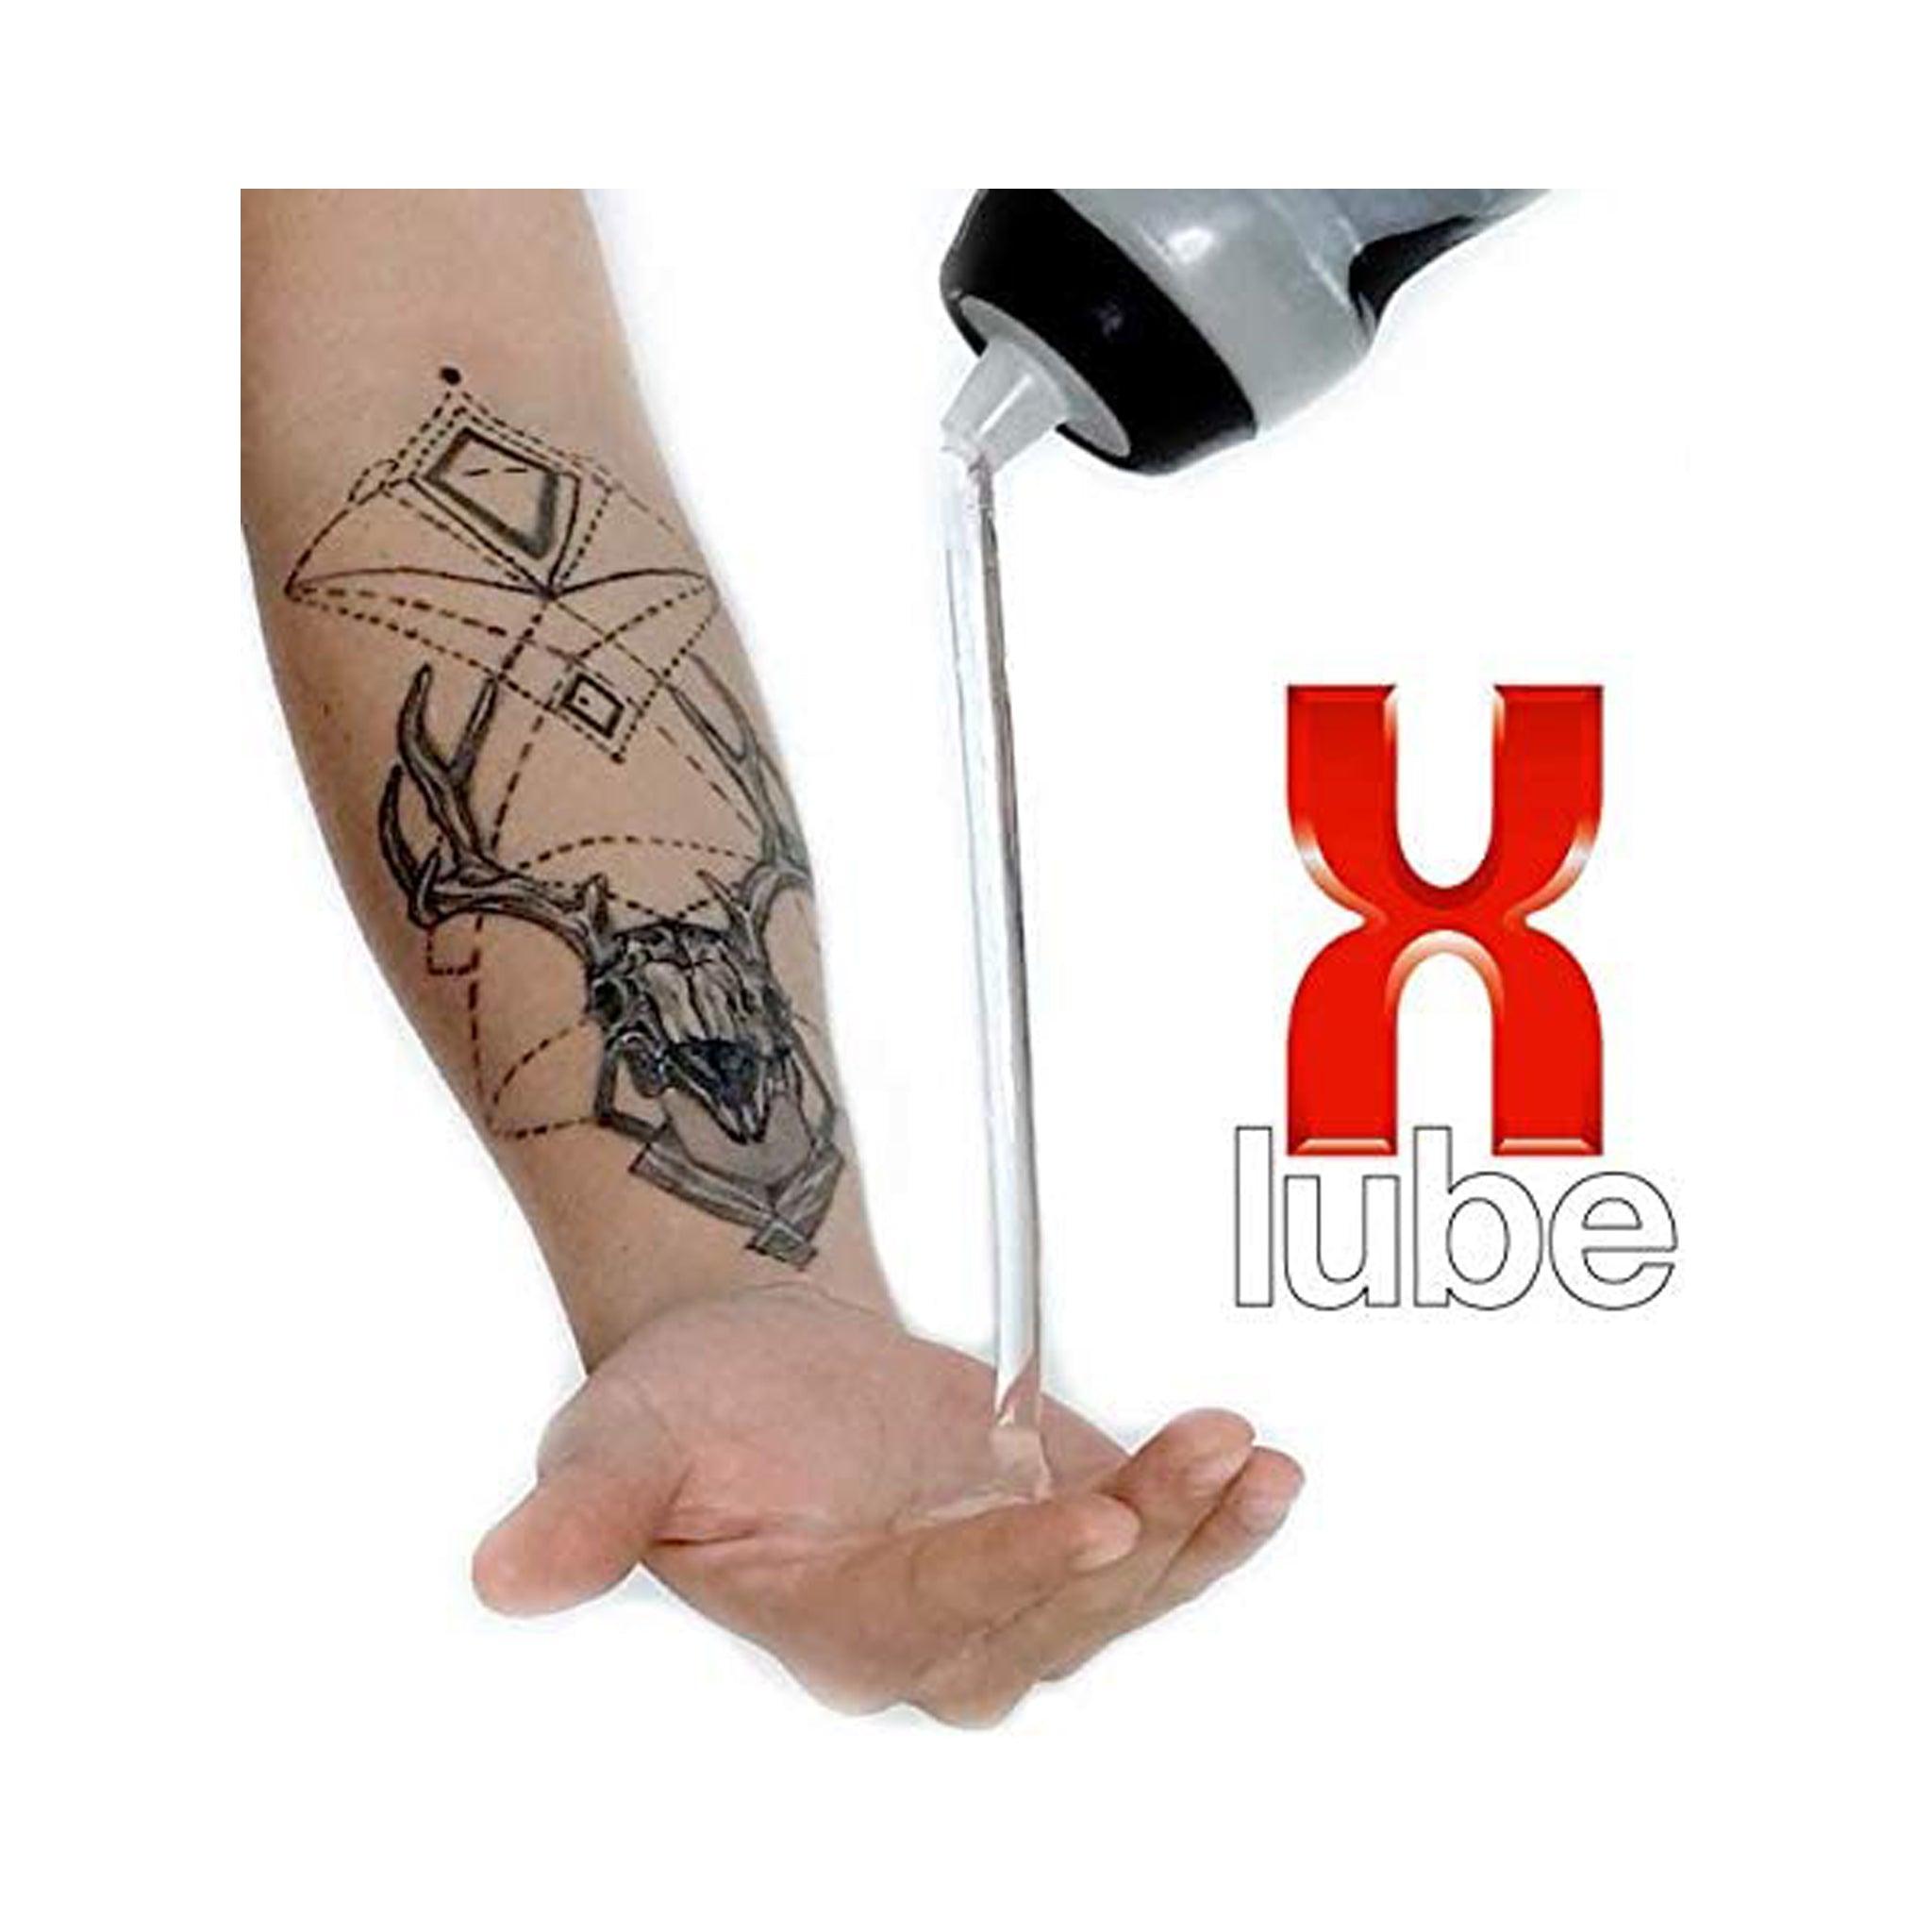 X LUBE Powder Lubricant 100g - Makes up to 5 Gallons - CheapLubes.com